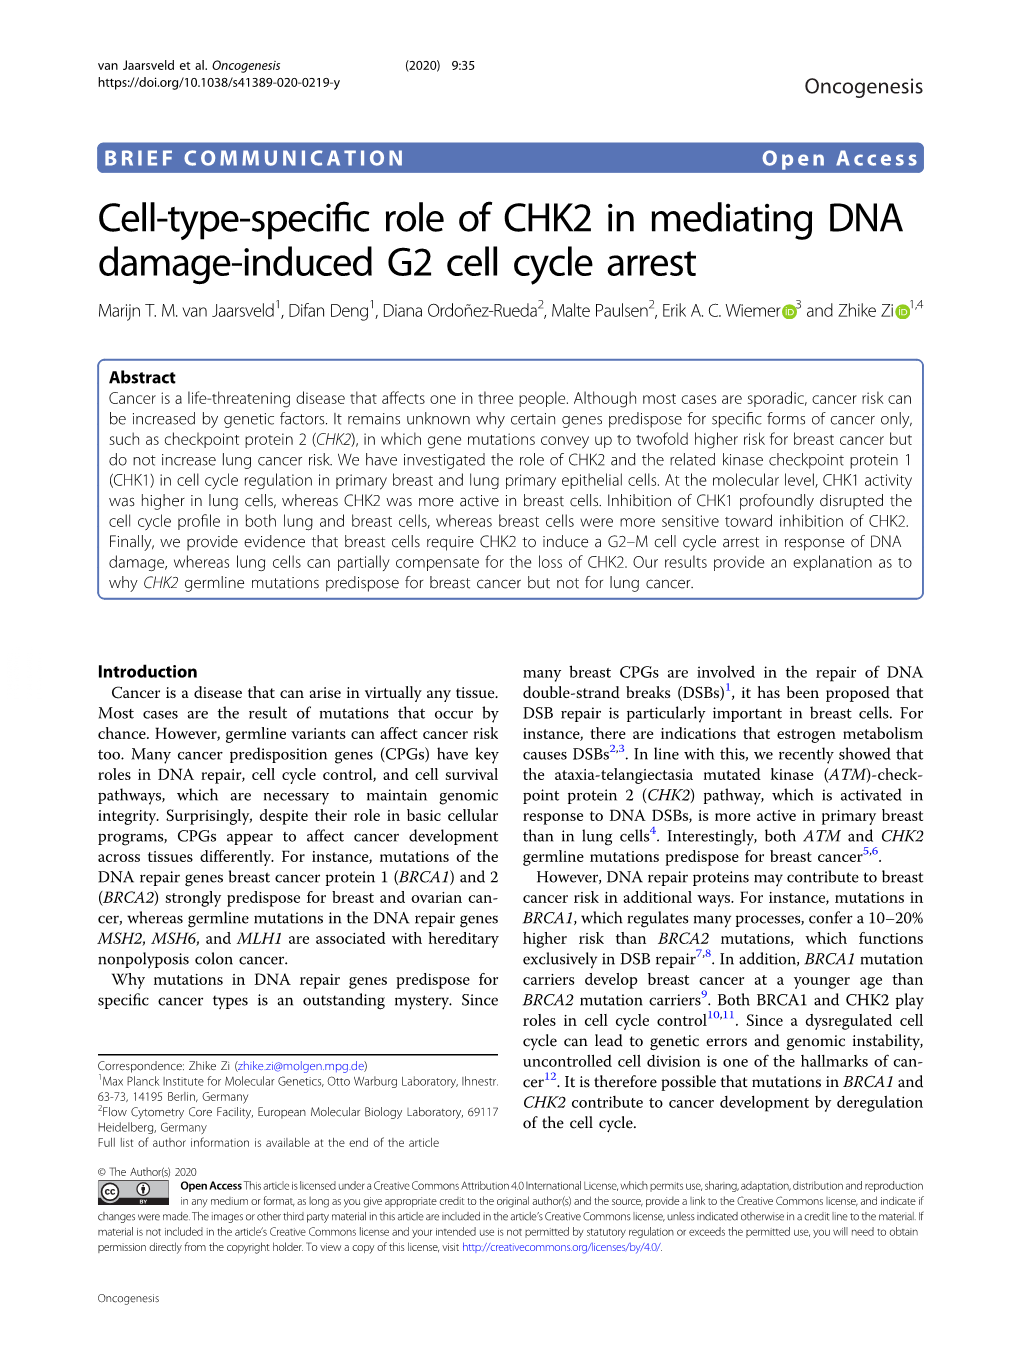 Cell-Type-Specific Role of CHK2 in Mediating DNA Damage-Induced